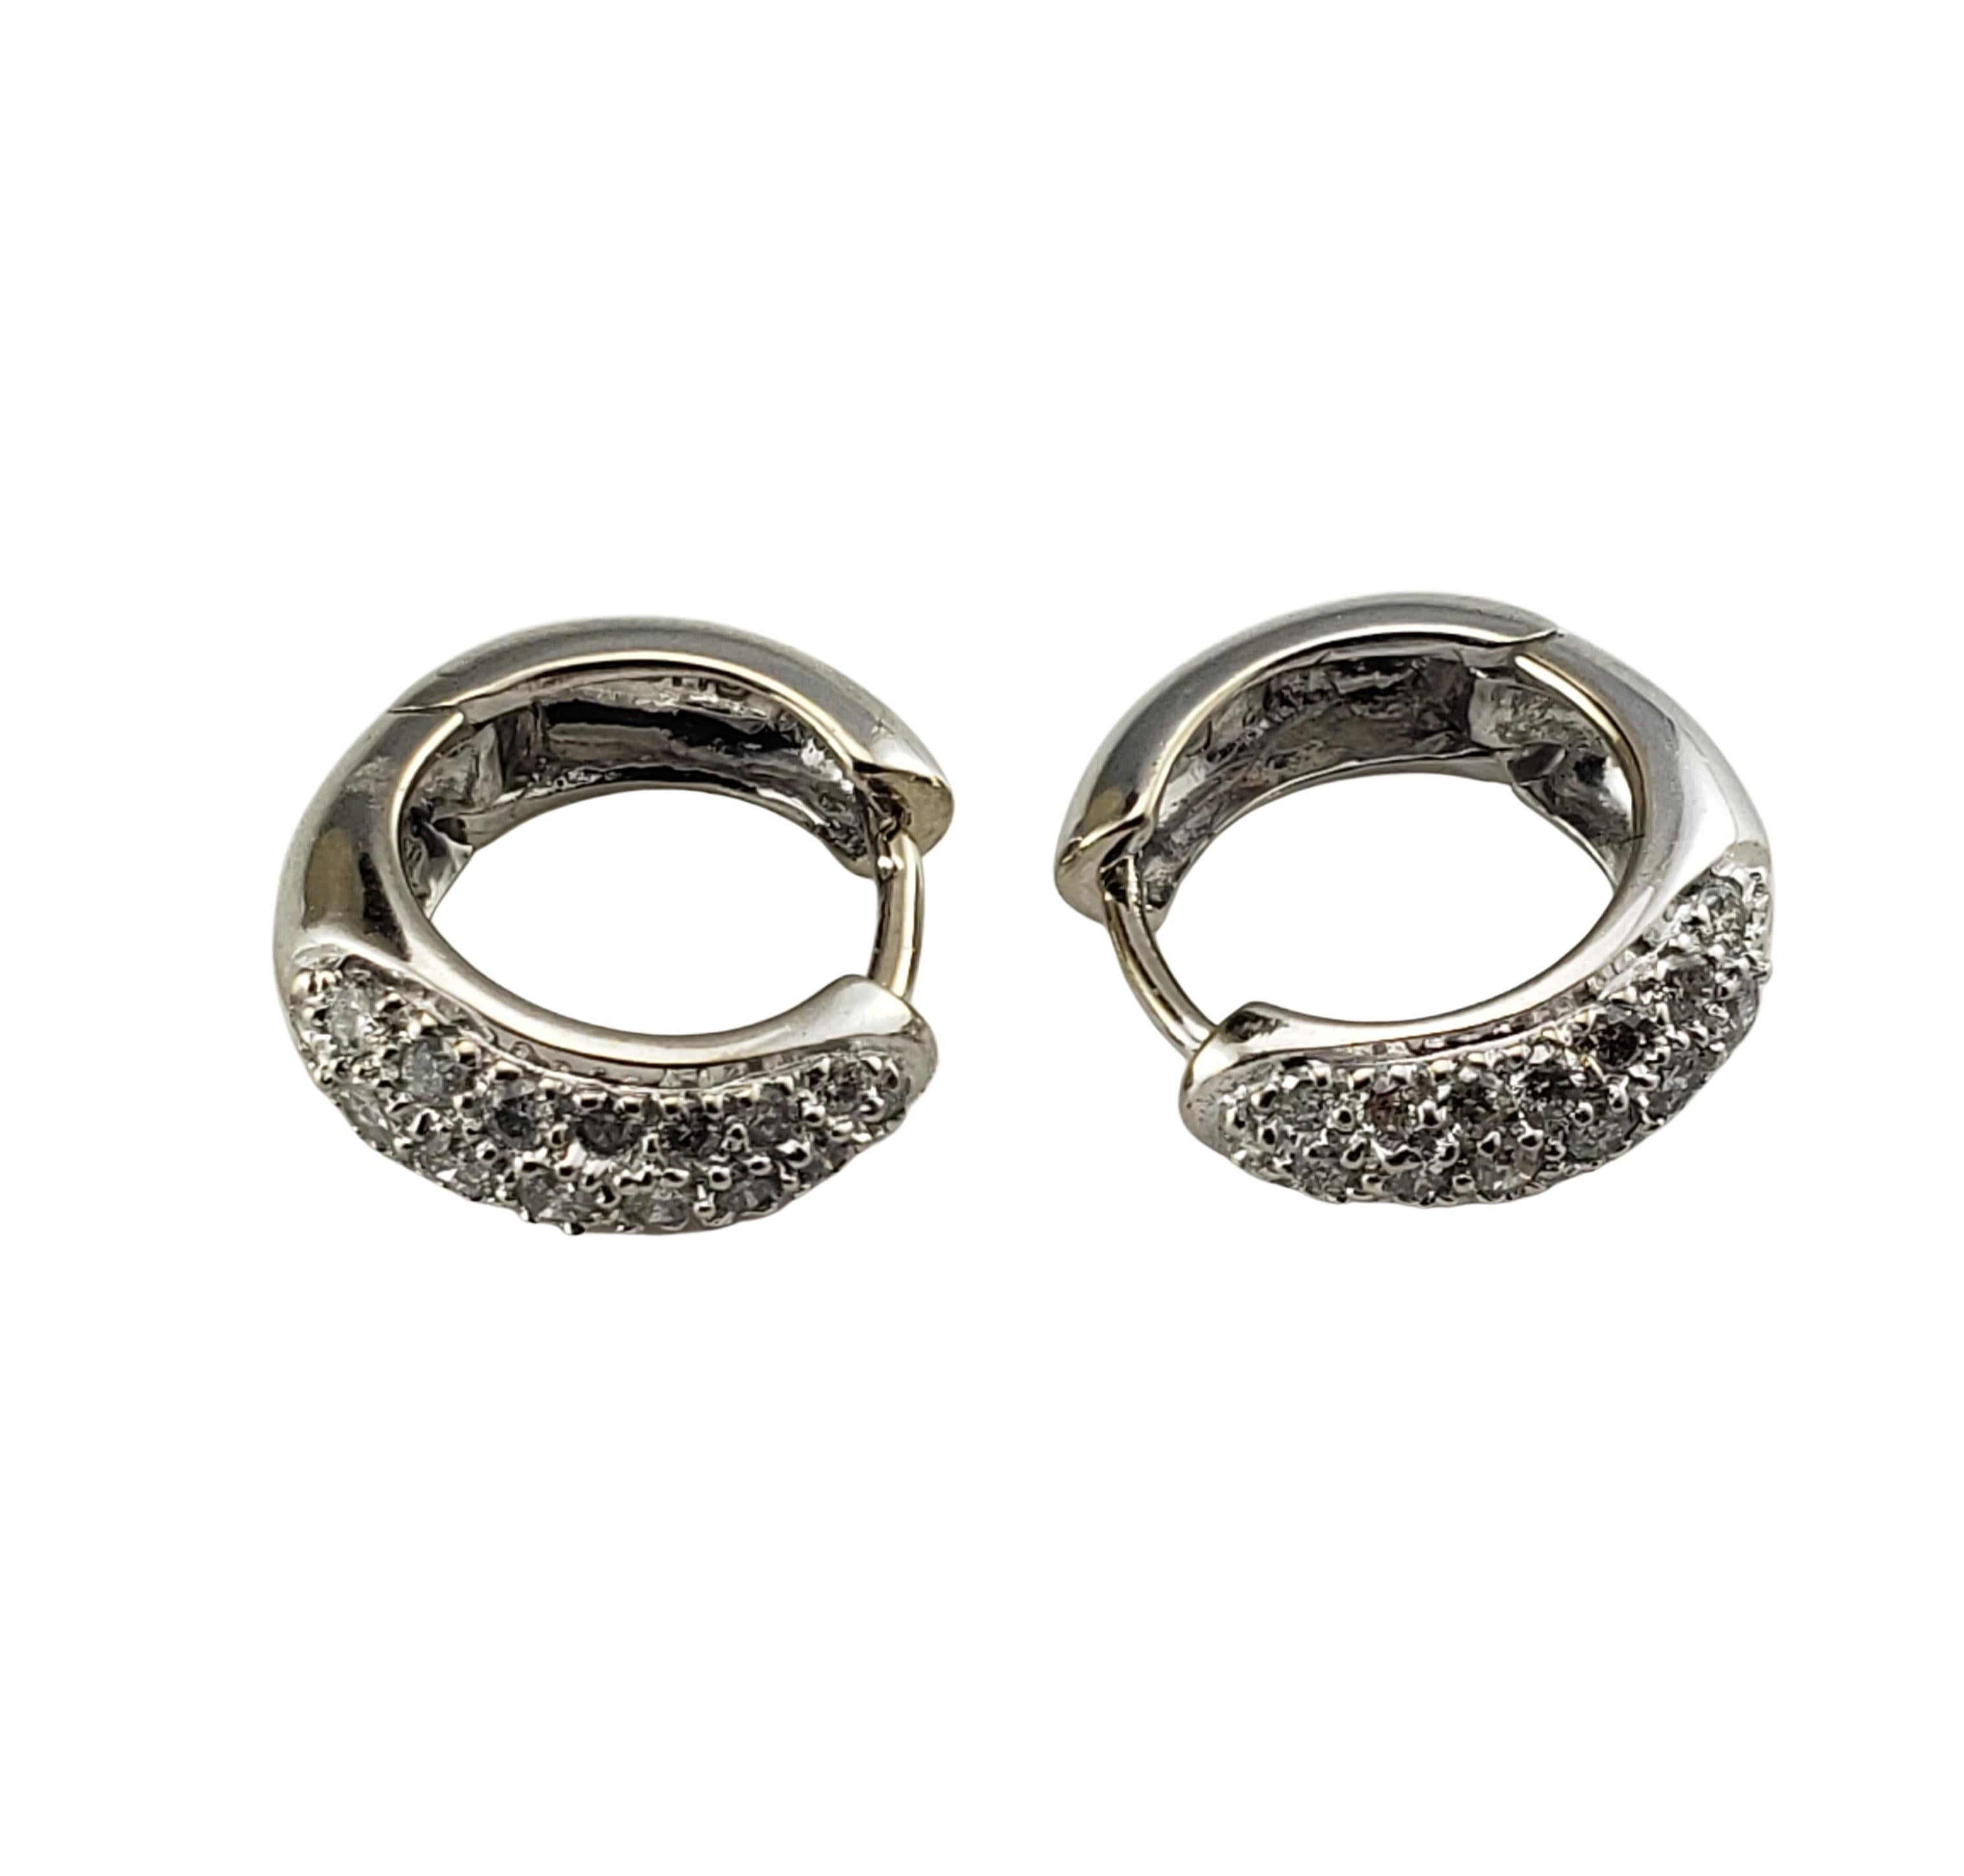 14 Karat White Gold and Diamond Hoop Earrings-

These sparkling hinged hoop earrings each feature 21 round brilliant cut diamonds set in classic 14K white gold.  Width:  4 mm

Approximate total diamond weight:  .60 ct.

Diamond color:  H-I

Diamond